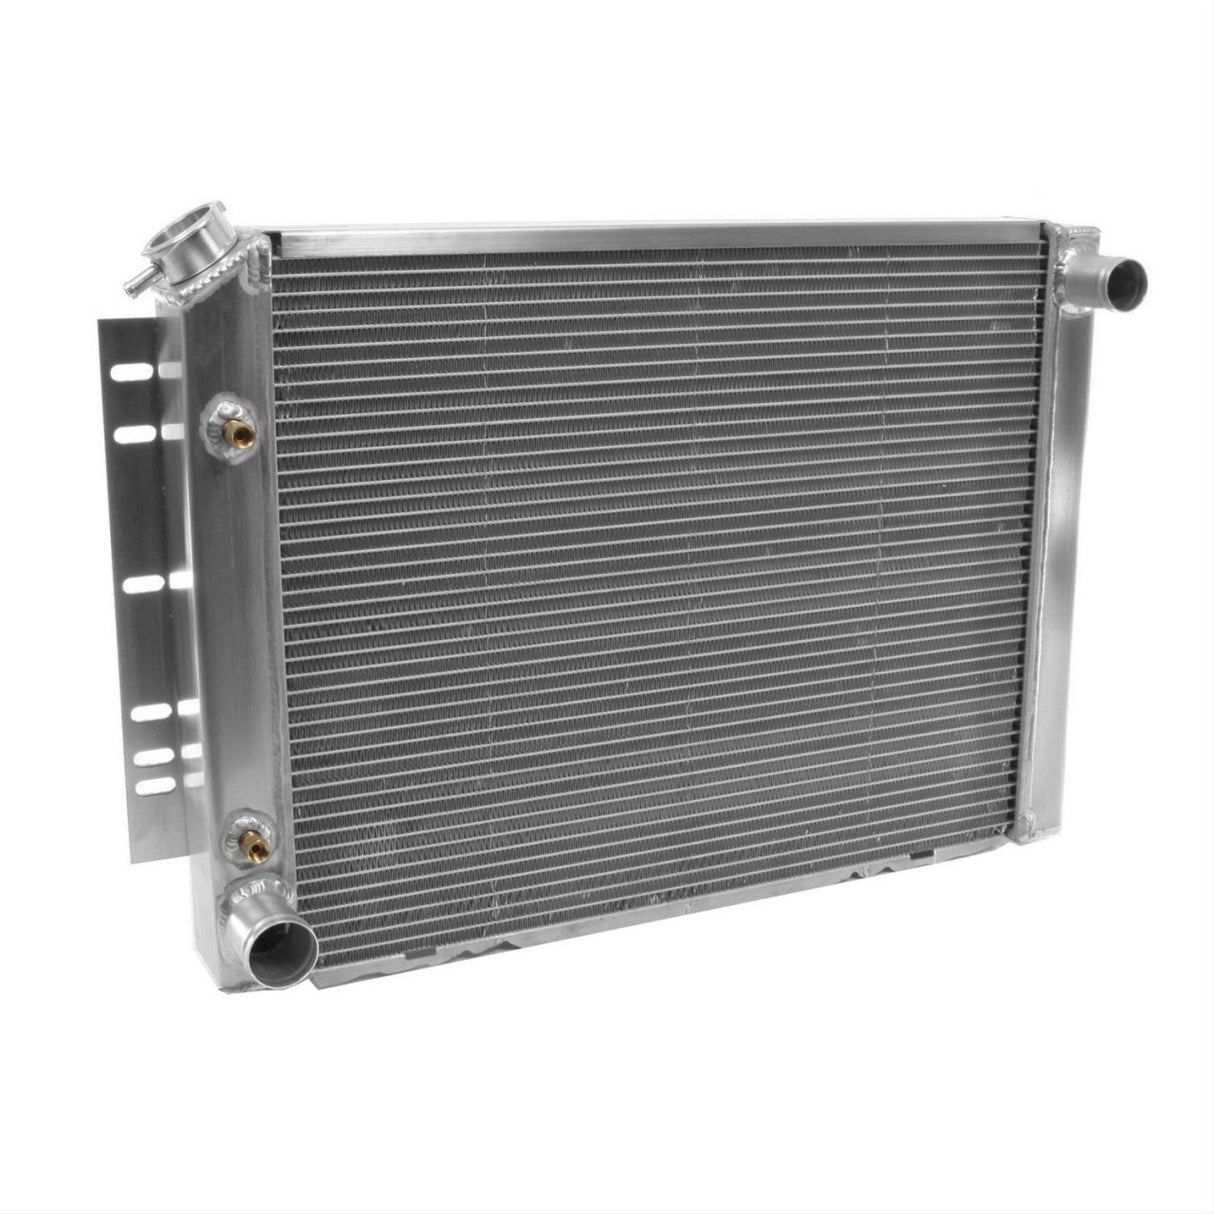 BE COOL RADIATOR DODGE A/B BODY 60-88 RAM WITH TRANS COOLER